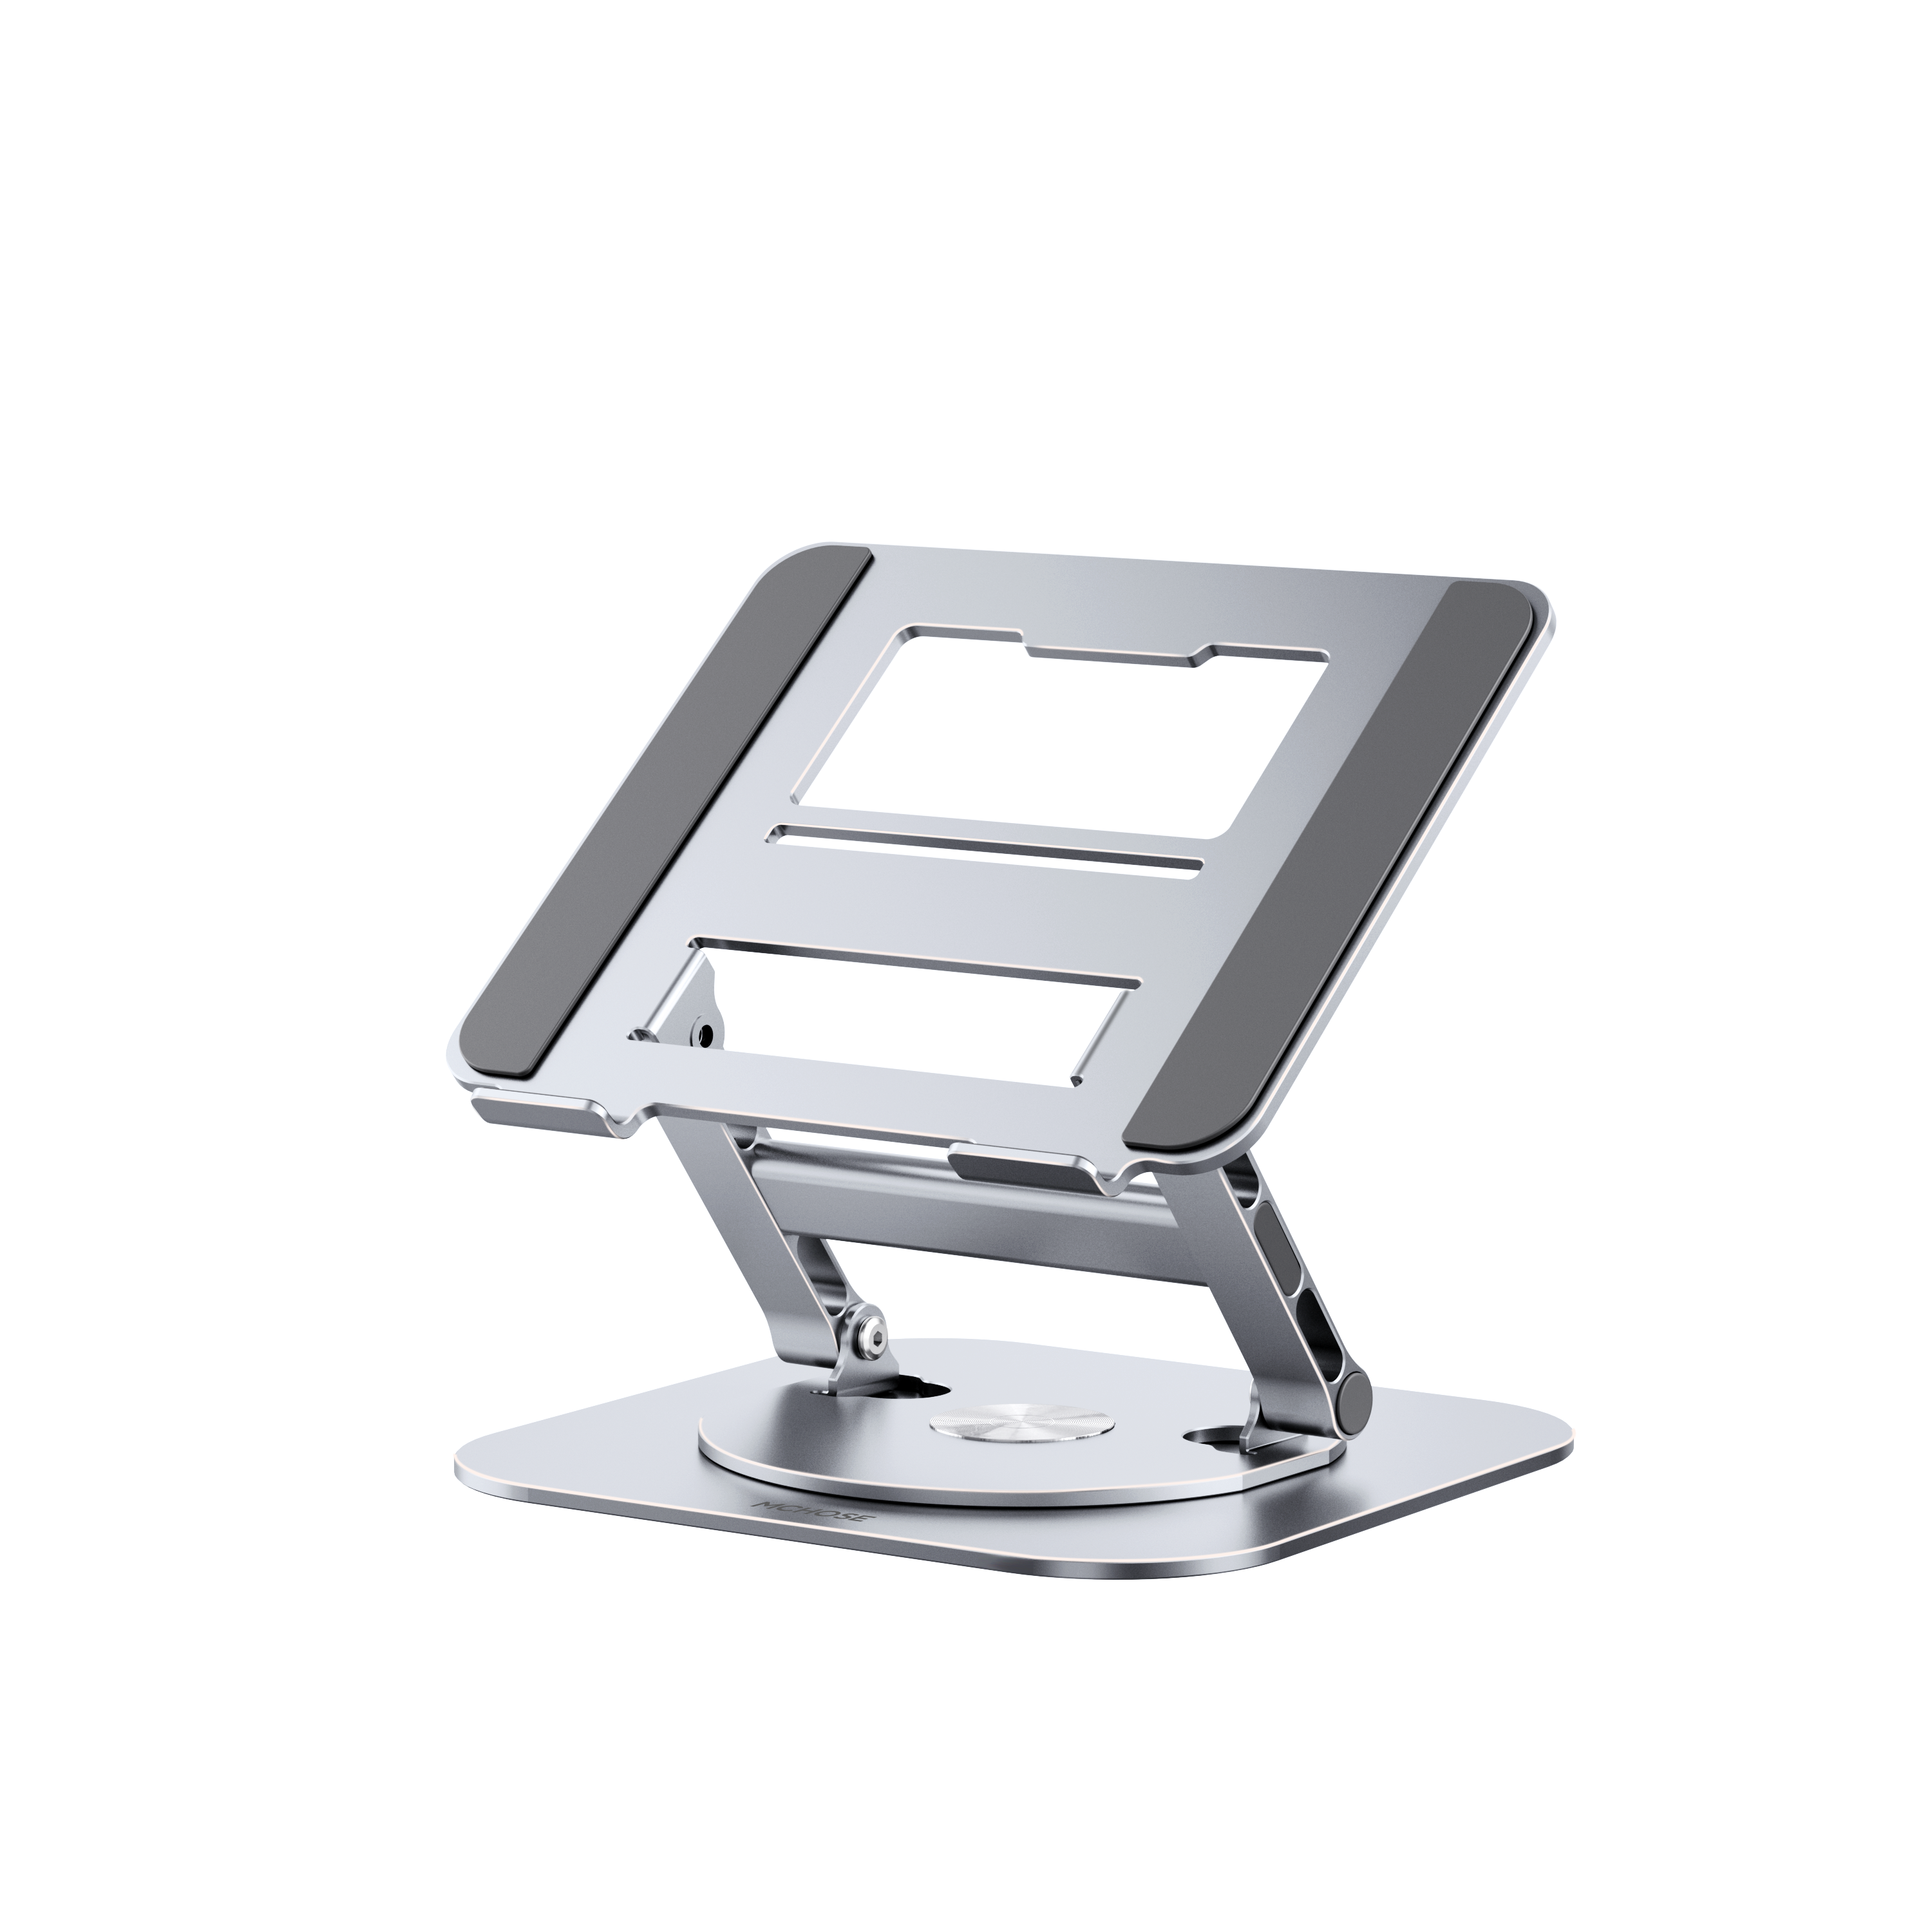 O2W SELECTION MCHOSE 928 360Rotation Laptop Stand